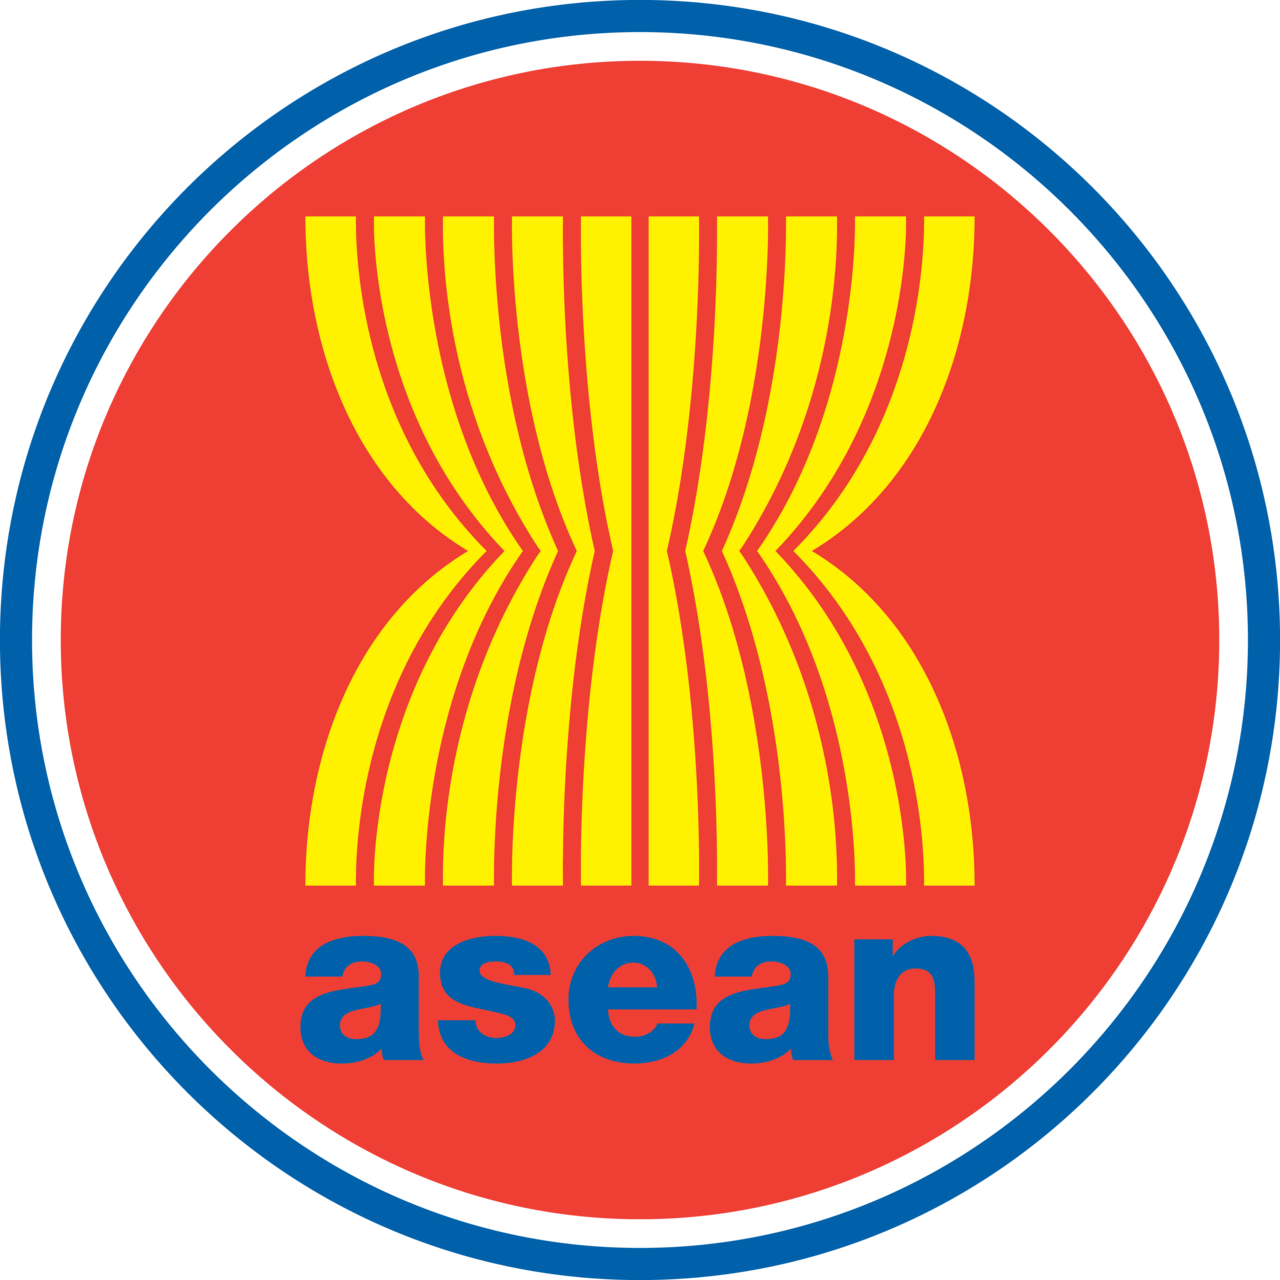 Commentary on TODAY, 11 June 2014: Cloud computing and connectivity in ASEAN by Lim May-Ann